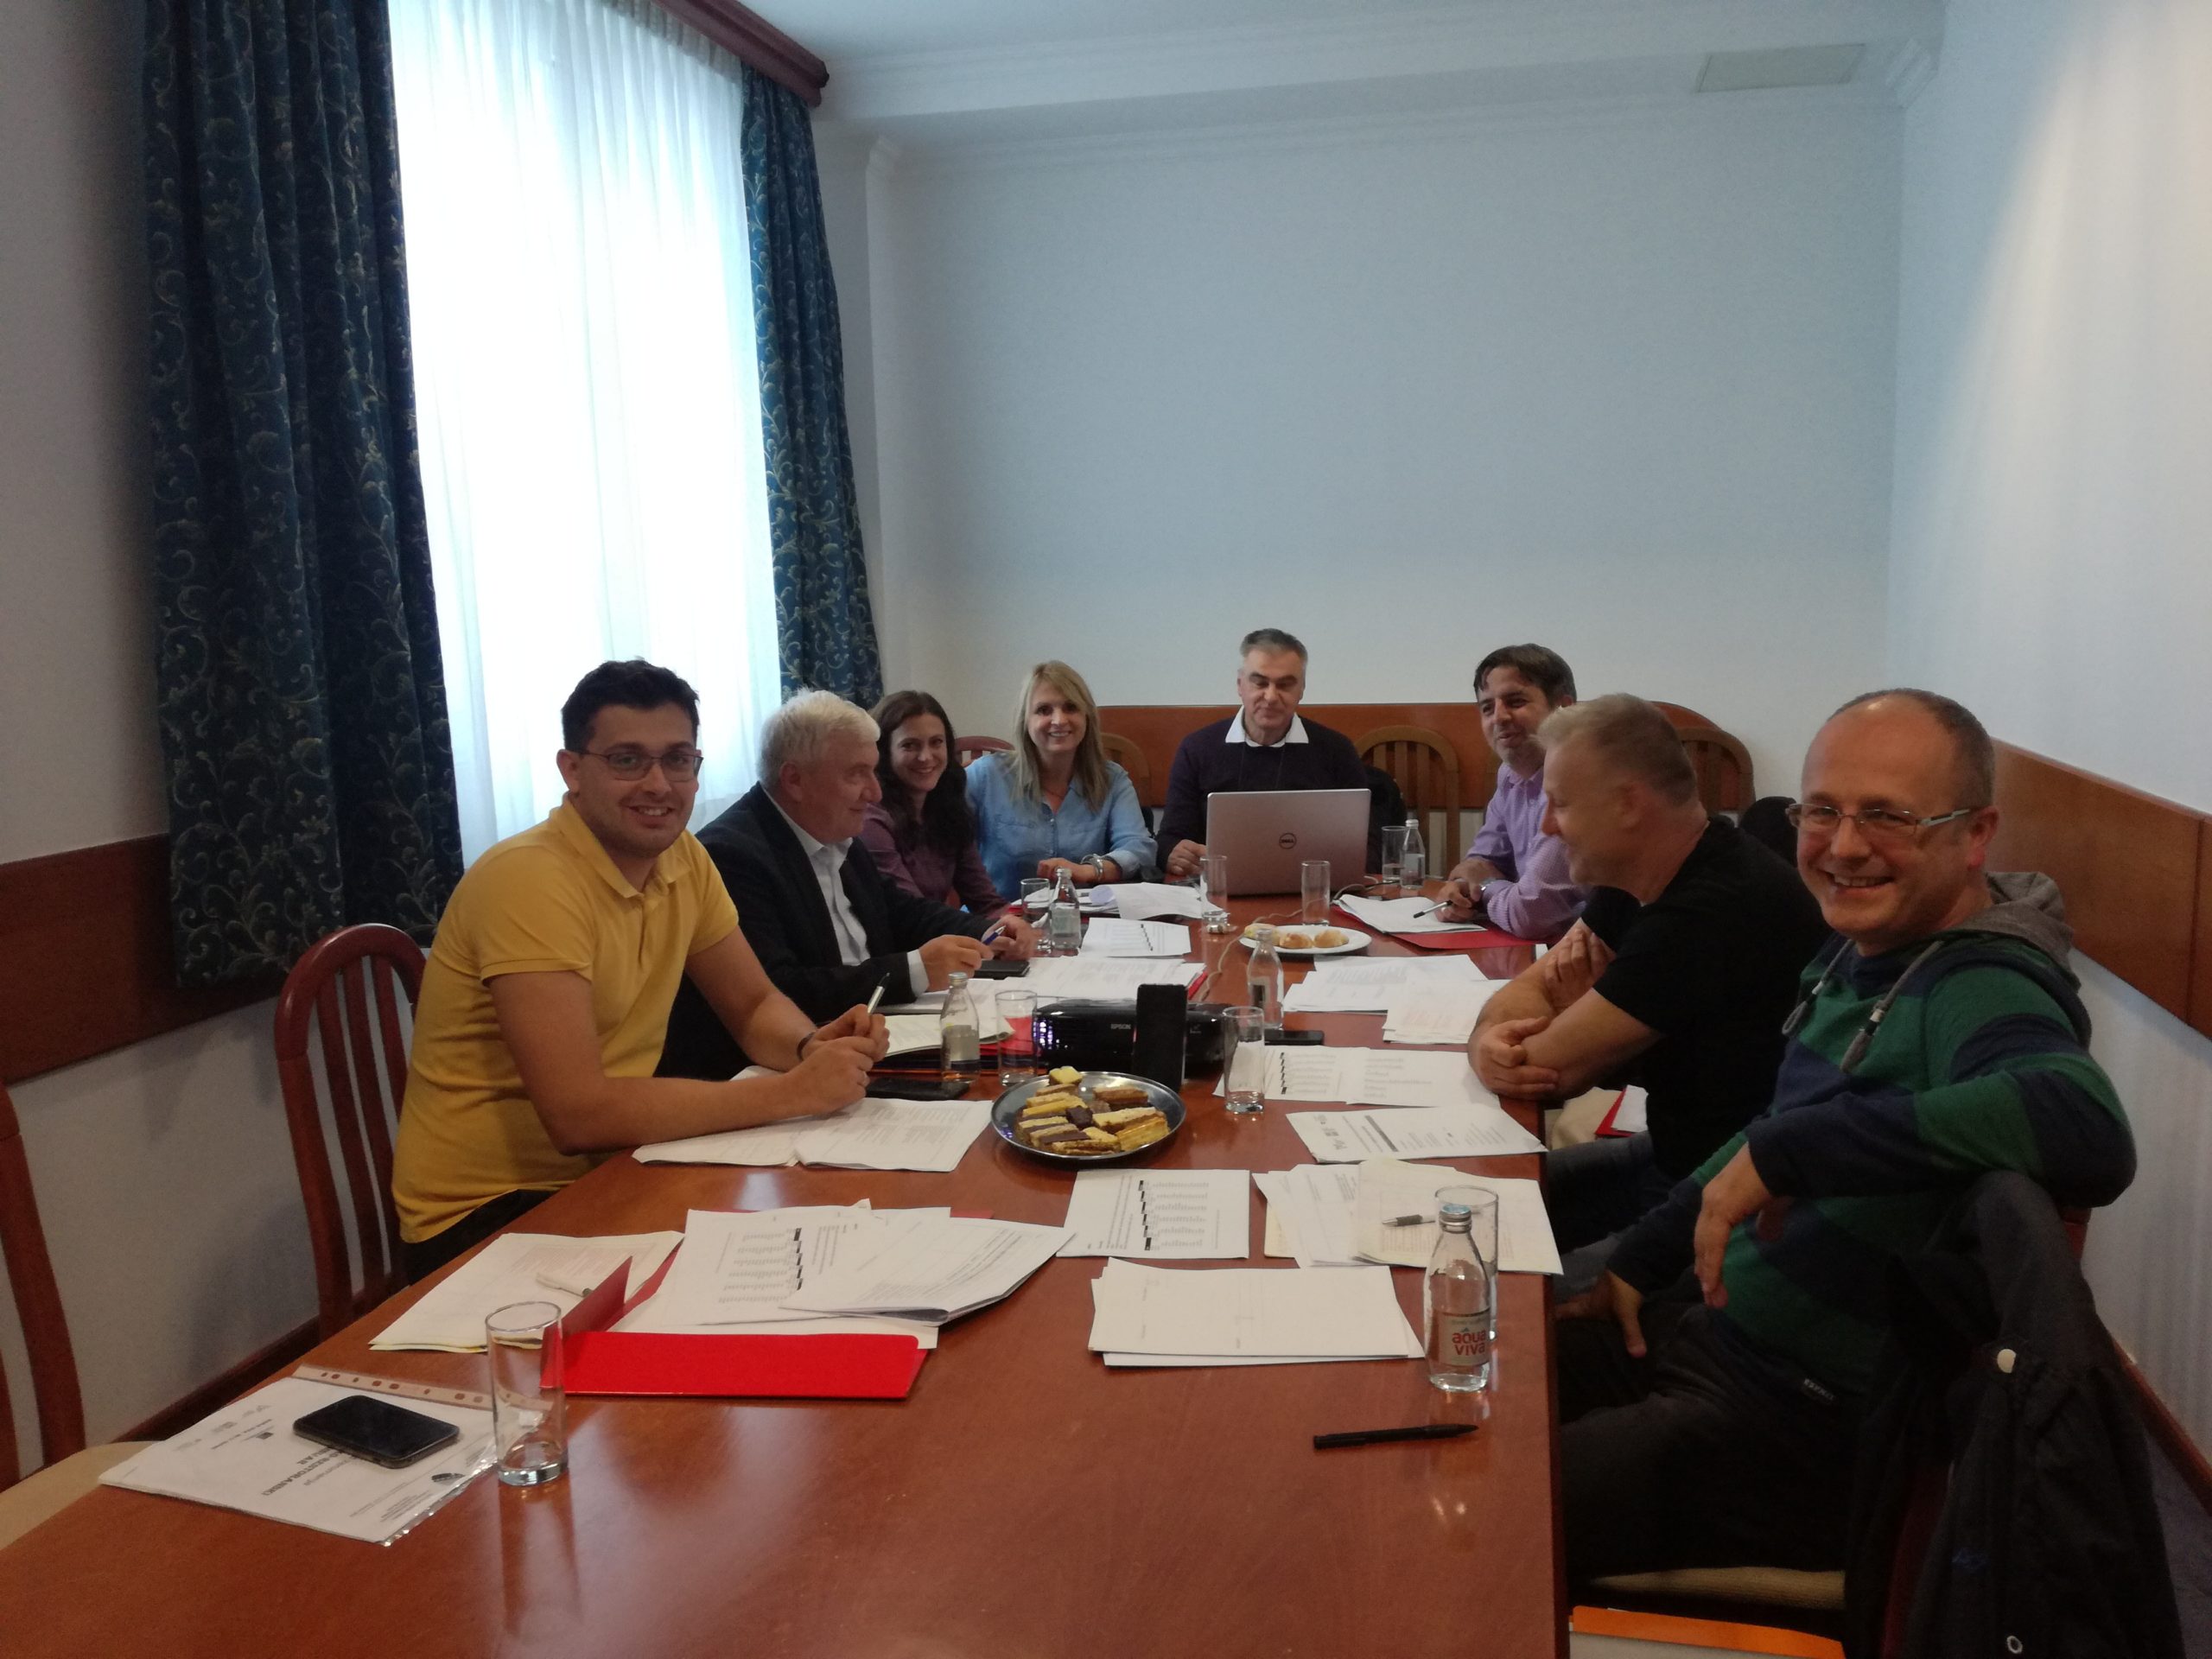 TO REGOS – The Second Working Group Meeting For The Hotel And Restaurant Technician Occupational Standard In BiH